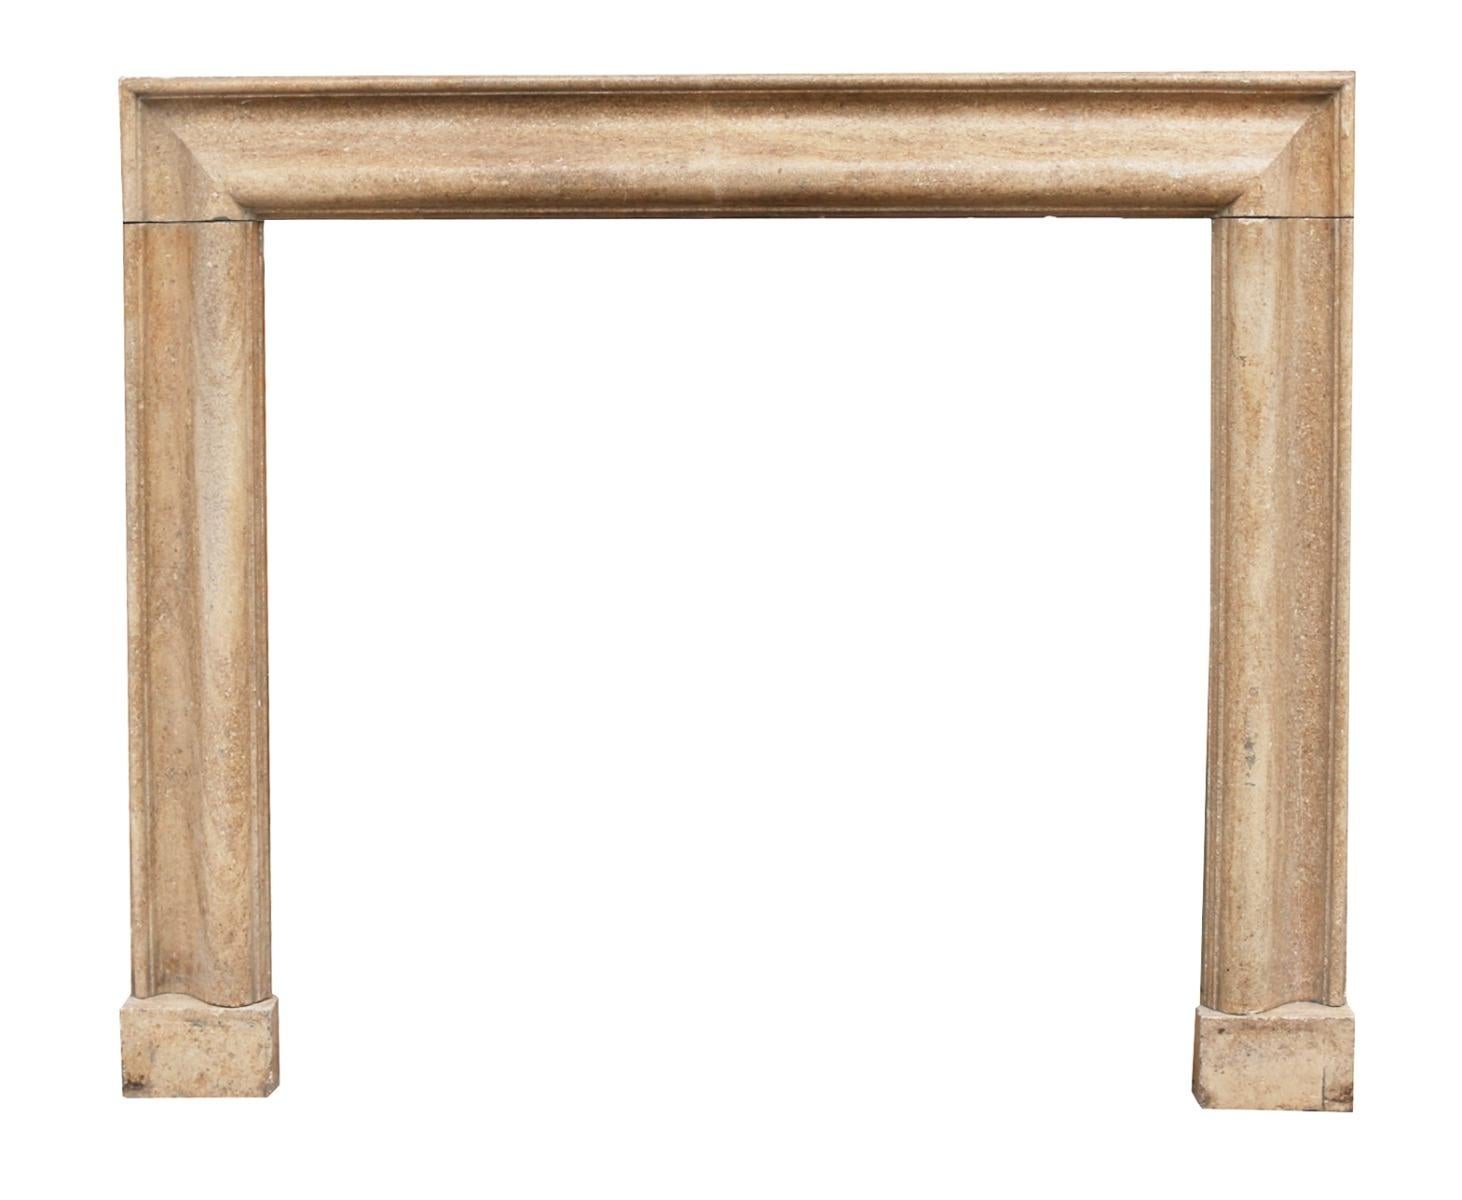 A bolection molded fireplace, hand carved from Limestone with many fossil inclusions.

Measures: Opening height 105.5 cm

Opening width 111.5 cm.